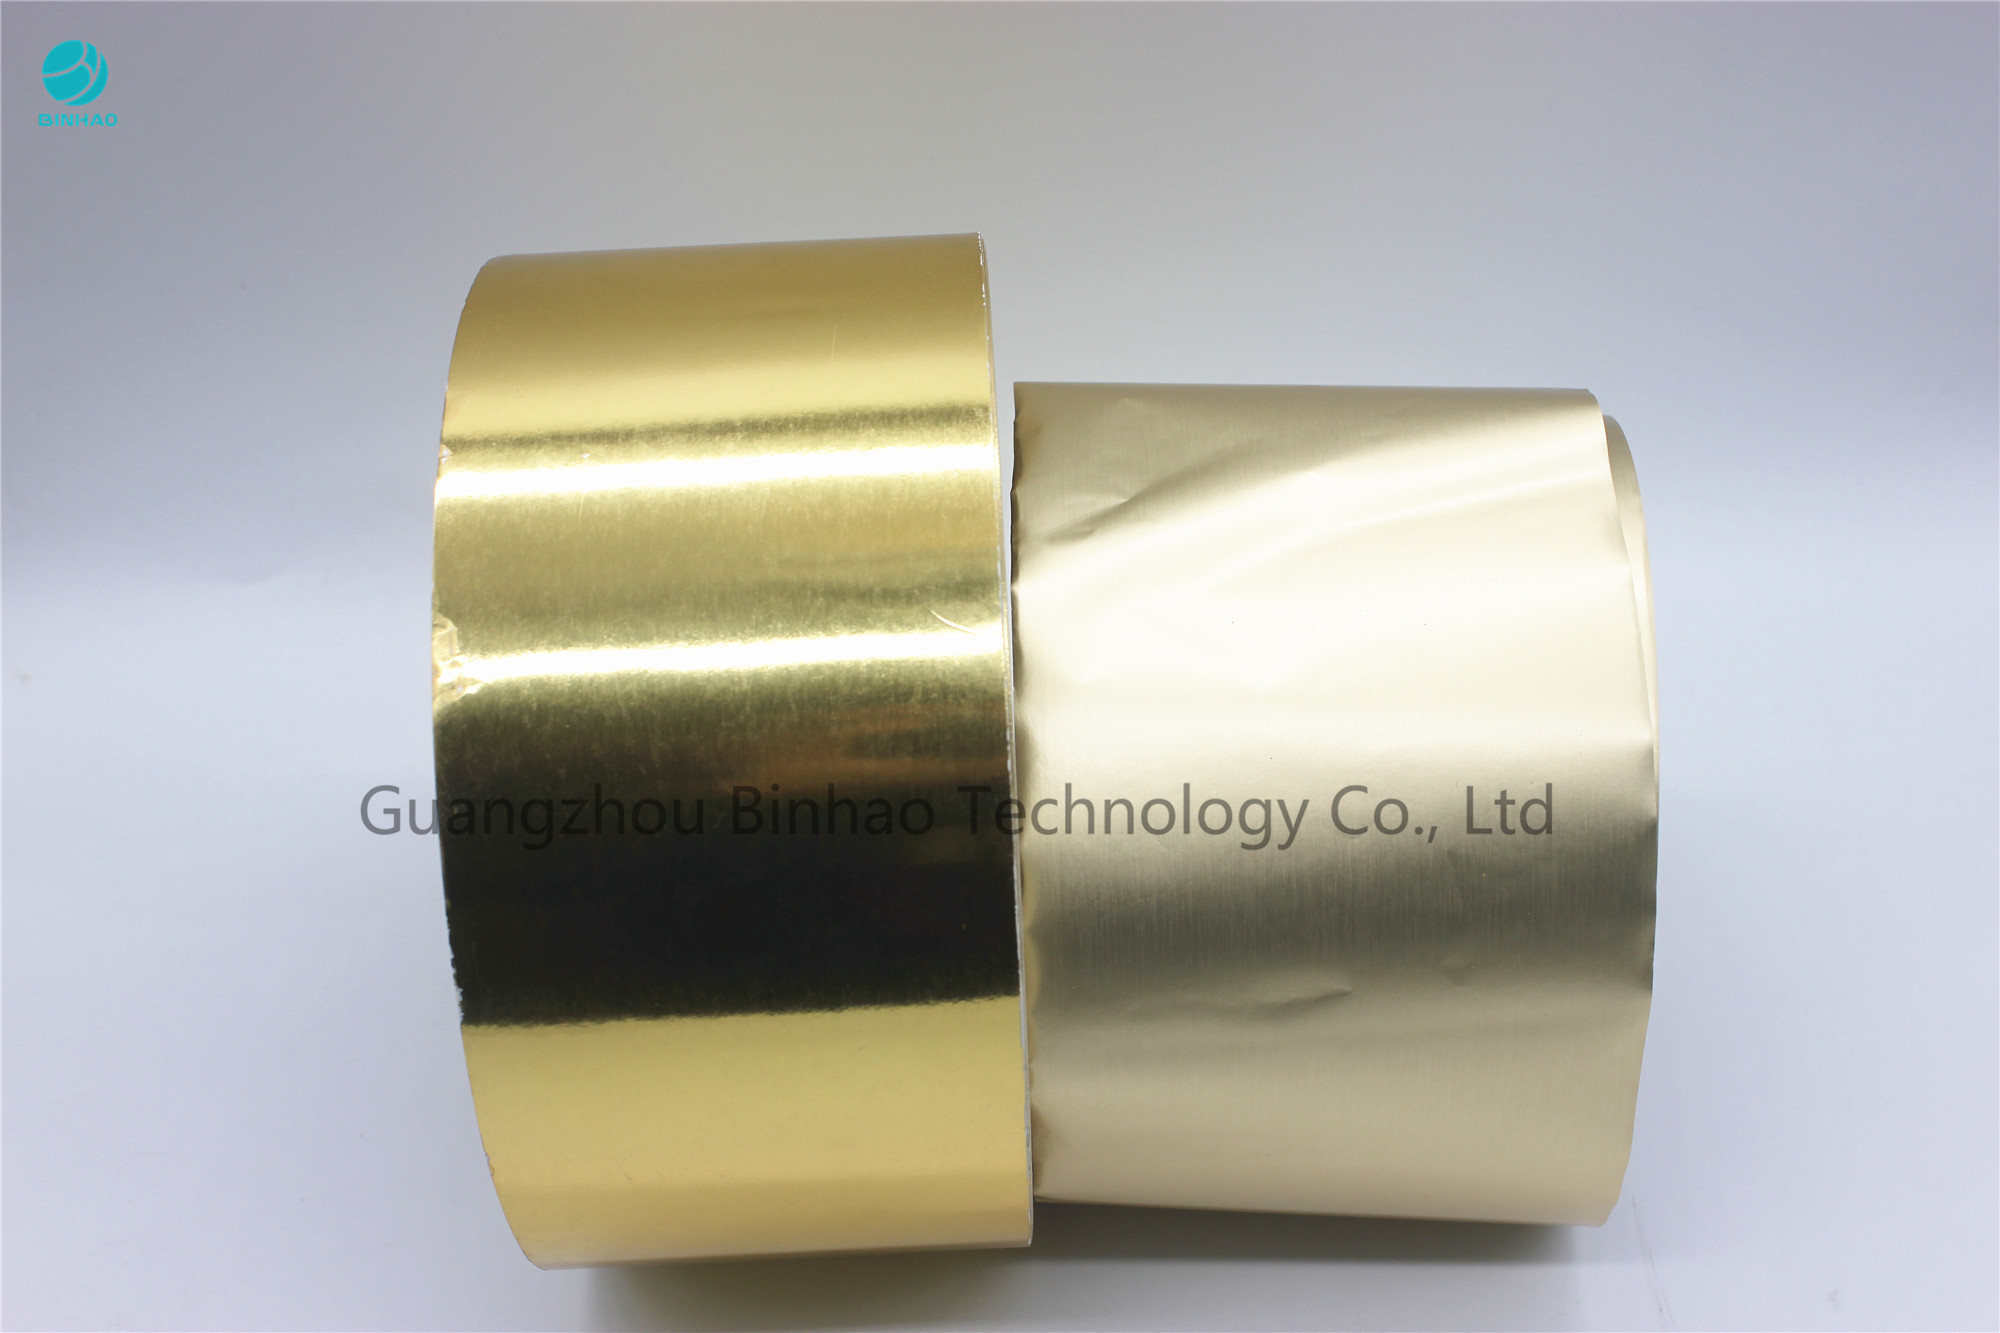 Anti Water Aluminium Foil Paper Printed And Coated Gold Silver  Laminated  In 55g